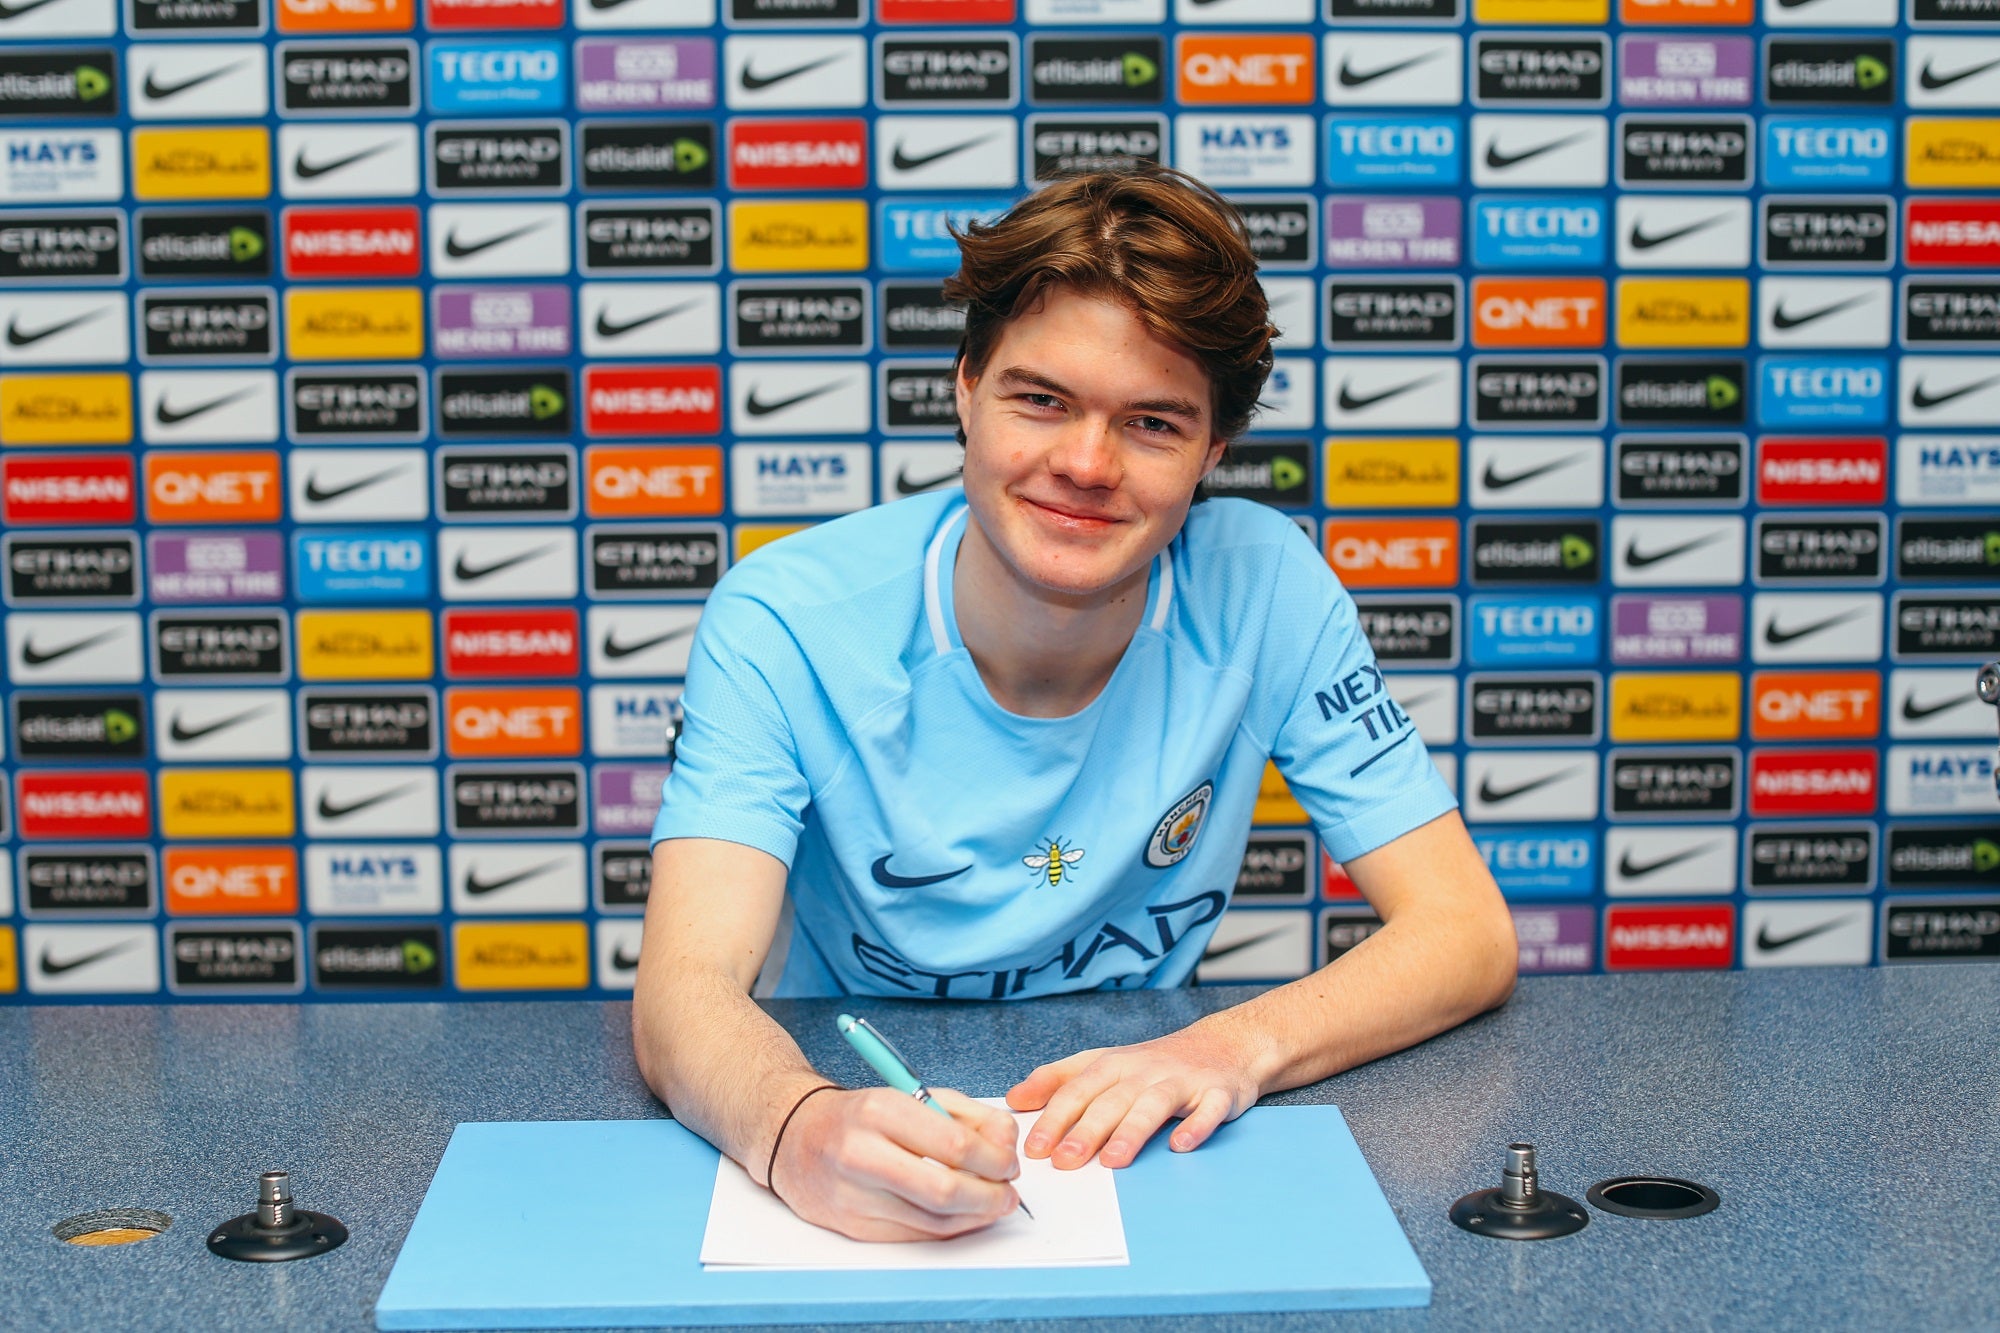 Man City begins January transfer business early with new signing